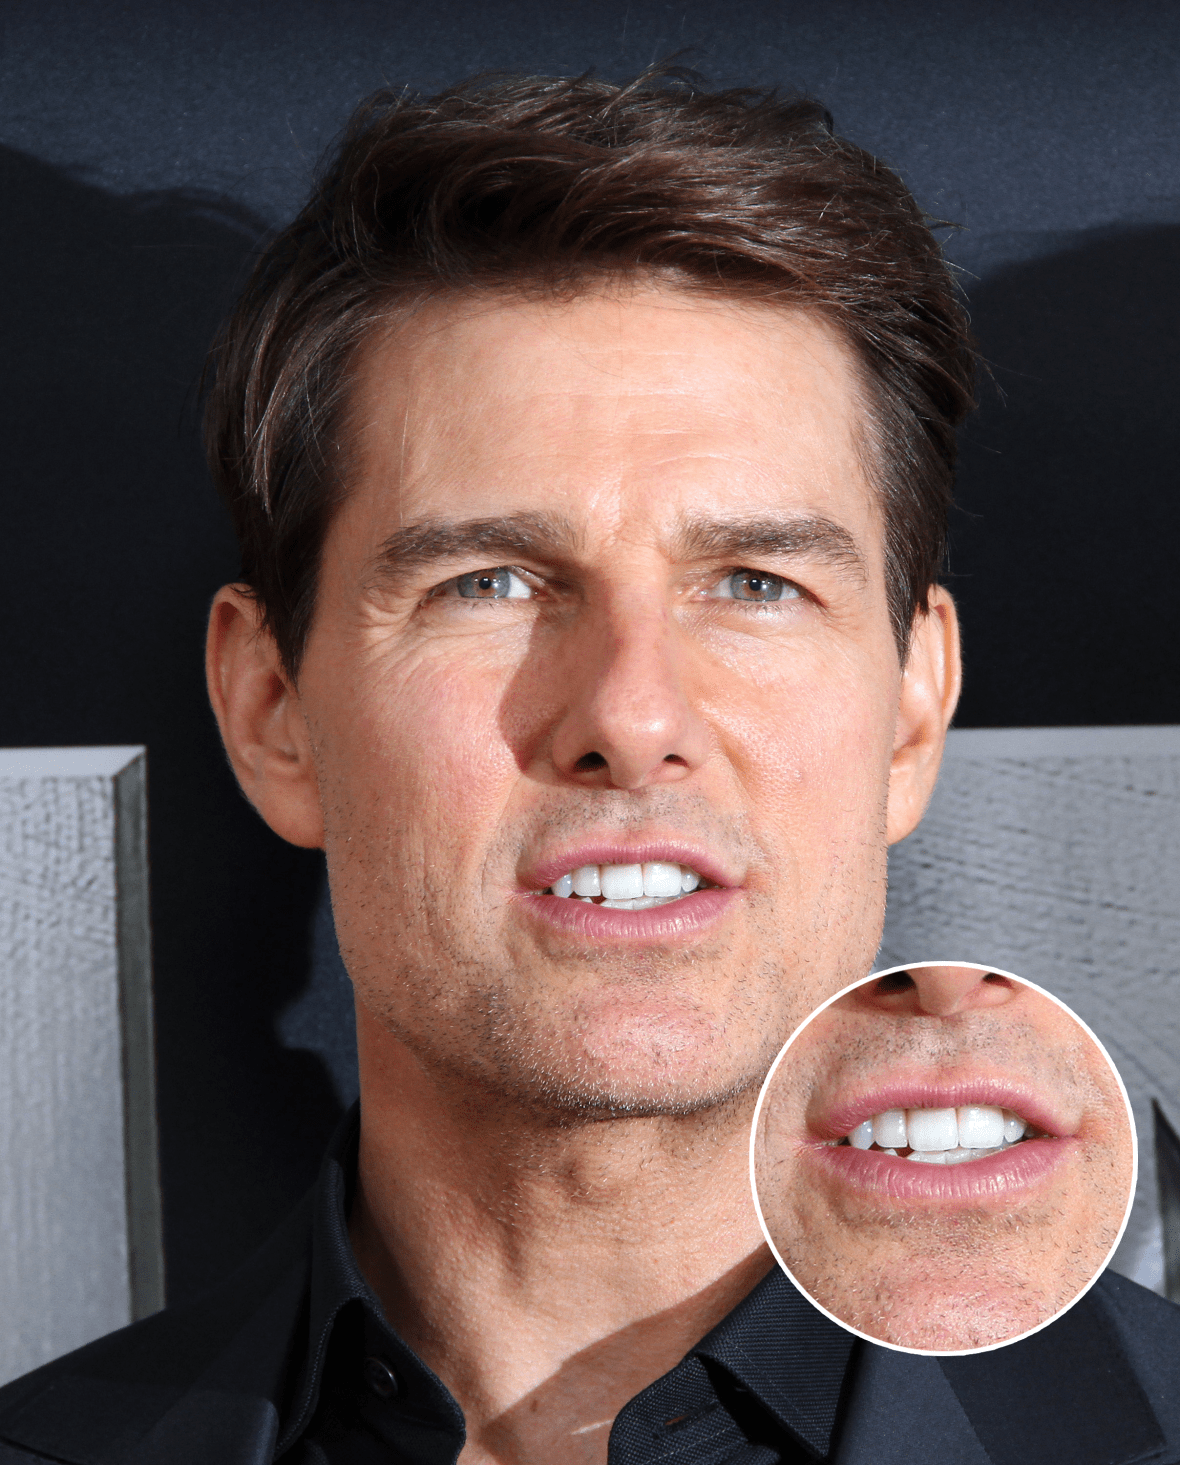 tom cruise has one front tooth